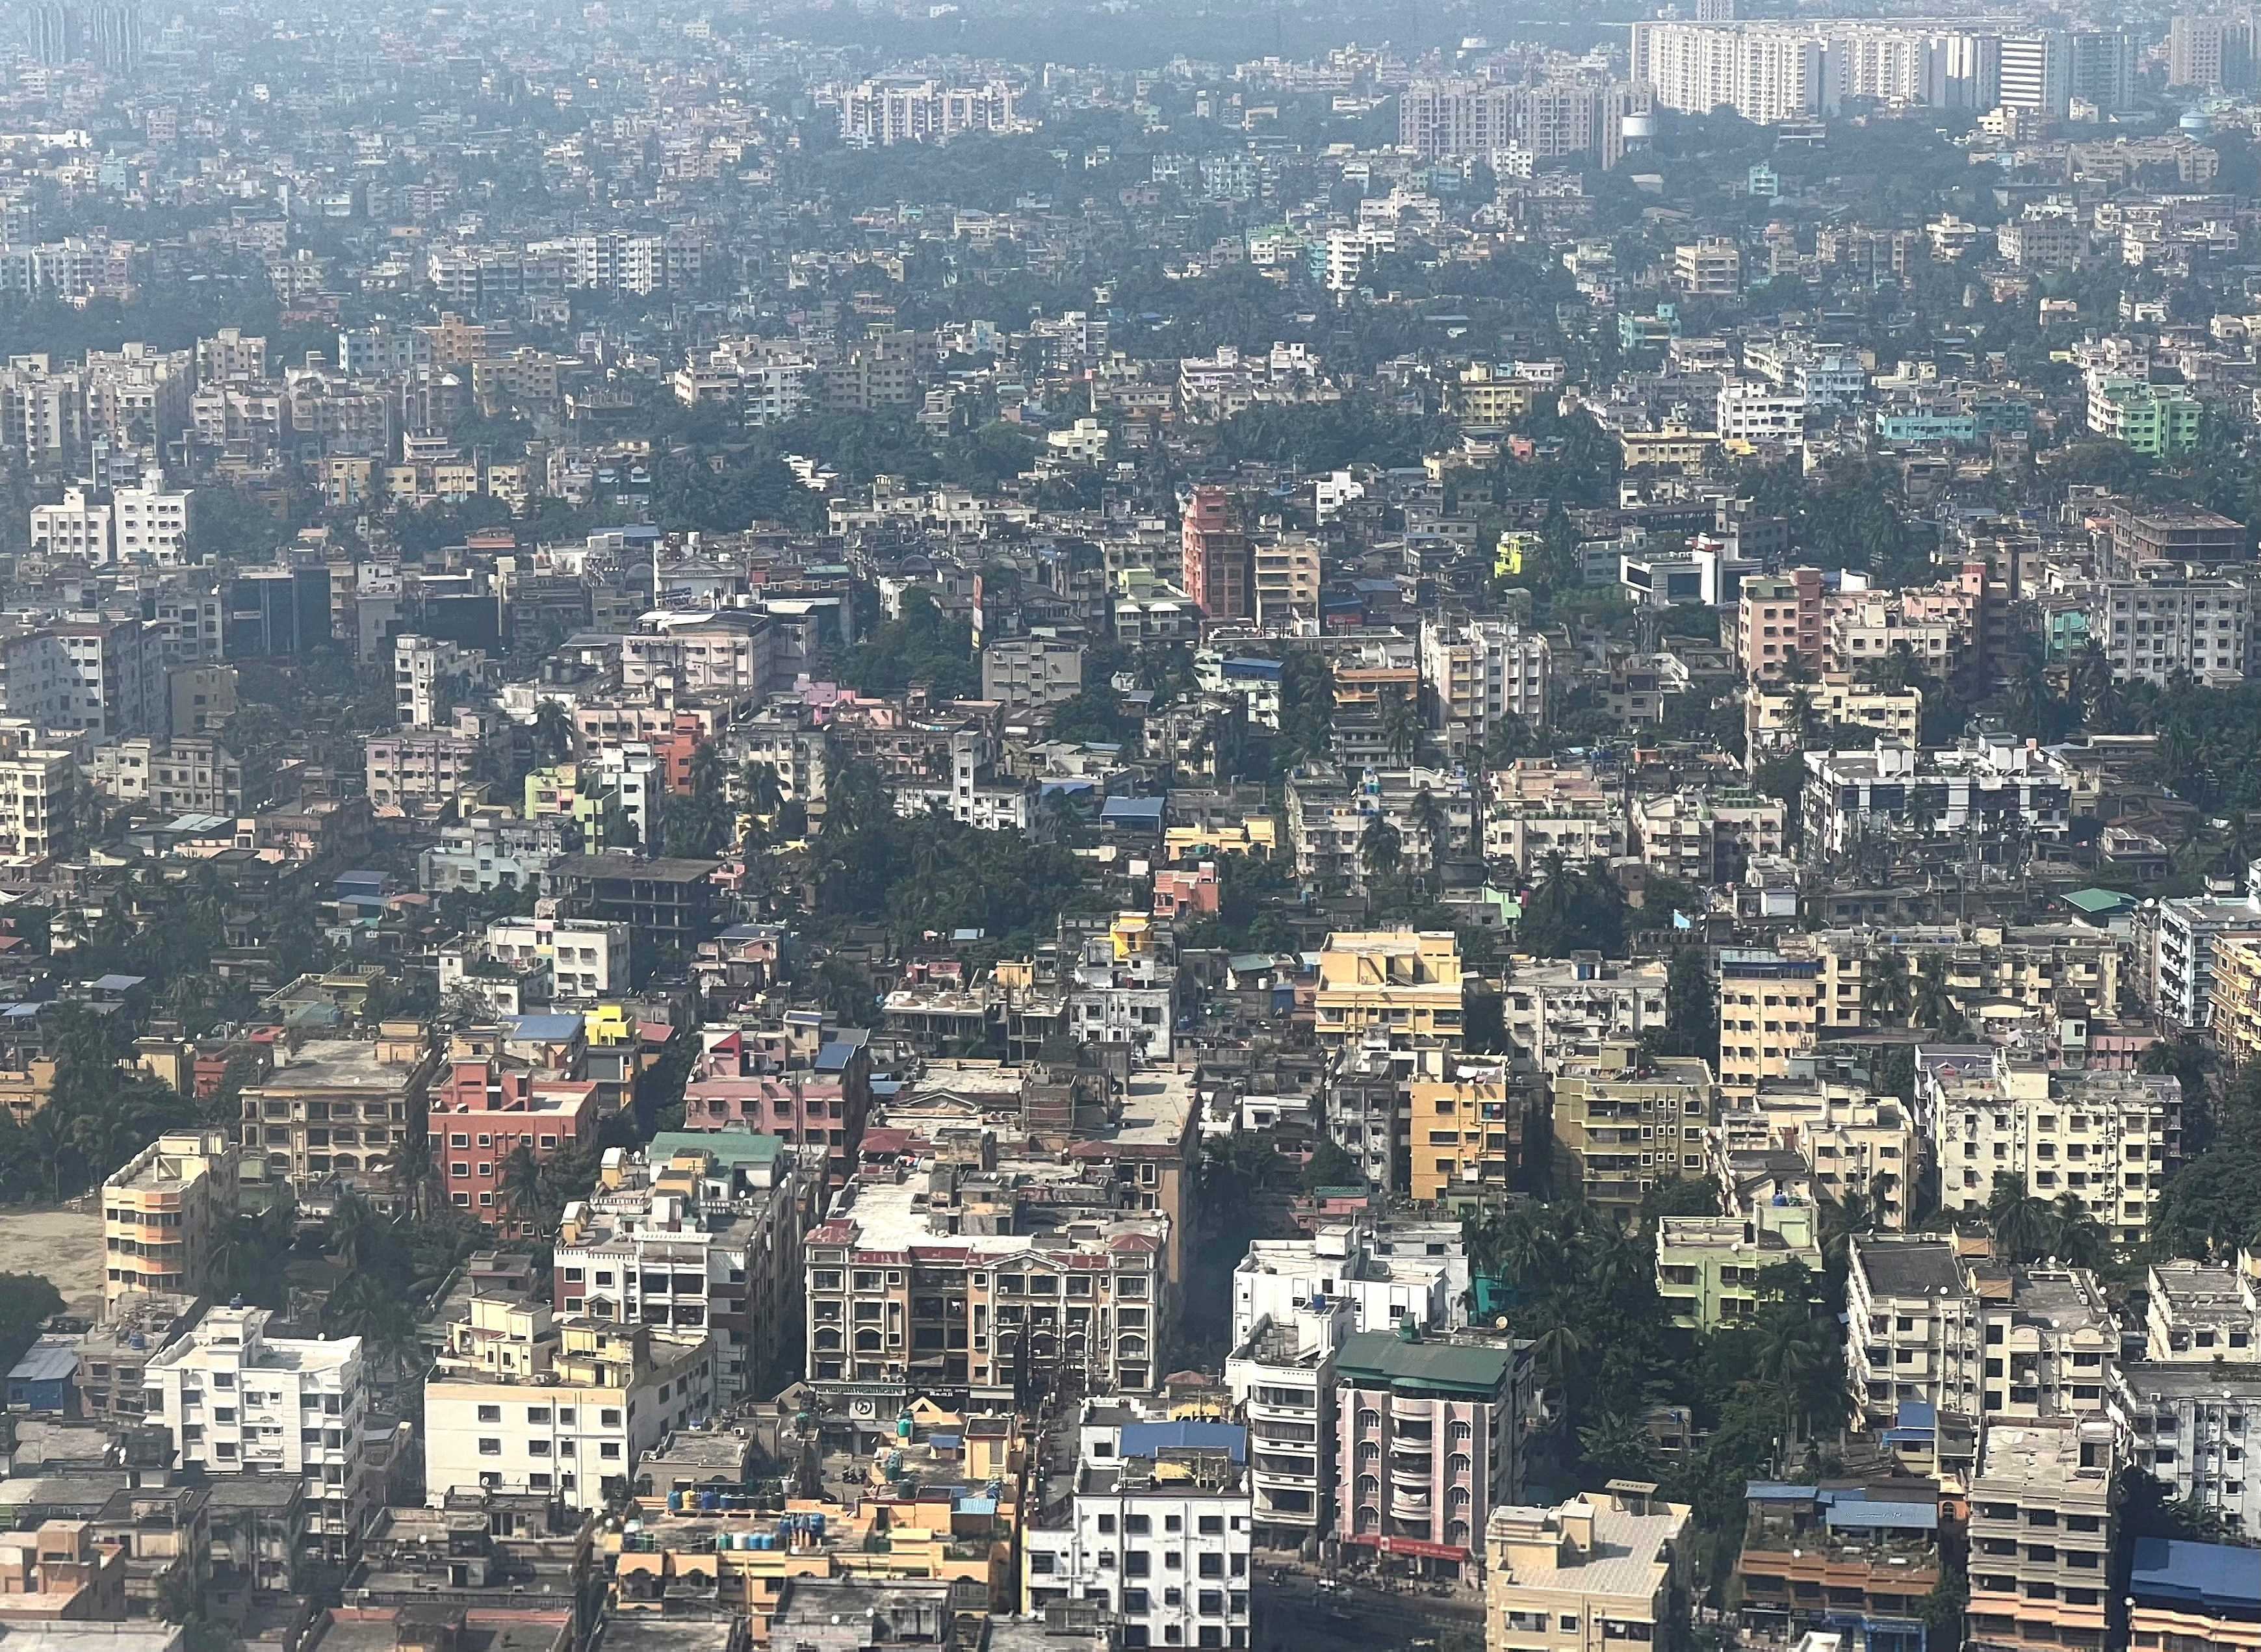 An aerial view shows residential and commercial building in Kolkata